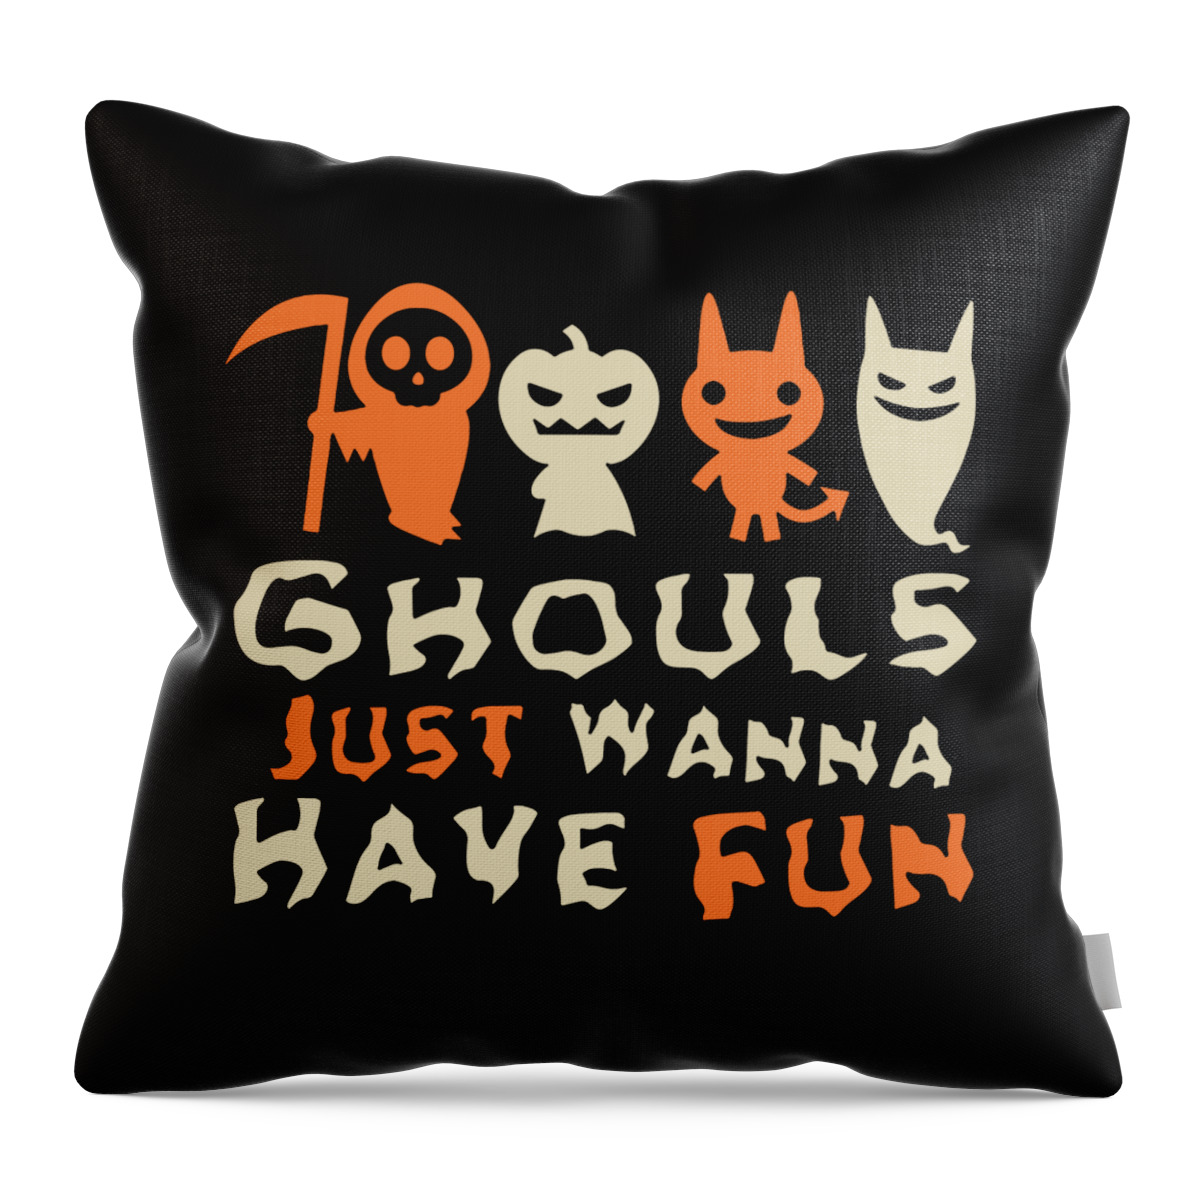 Cool Throw Pillow featuring the digital art Ghouls Just Wanna Have Fun Halloween by Flippin Sweet Gear